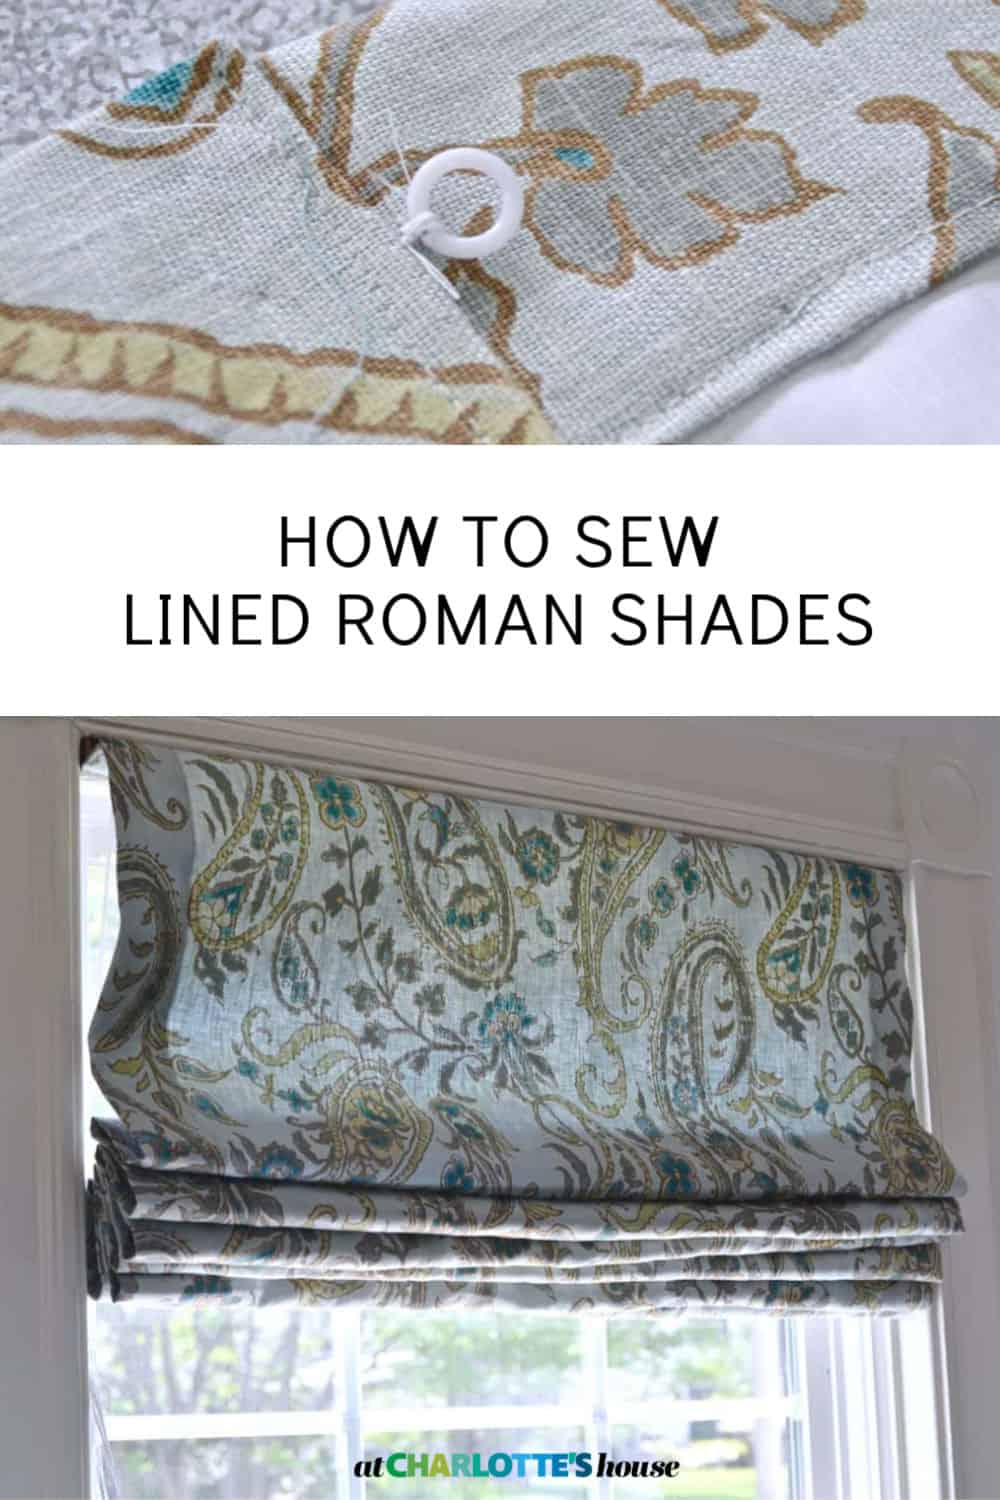 HOW TO SEW LINED ROMAN SHADES 